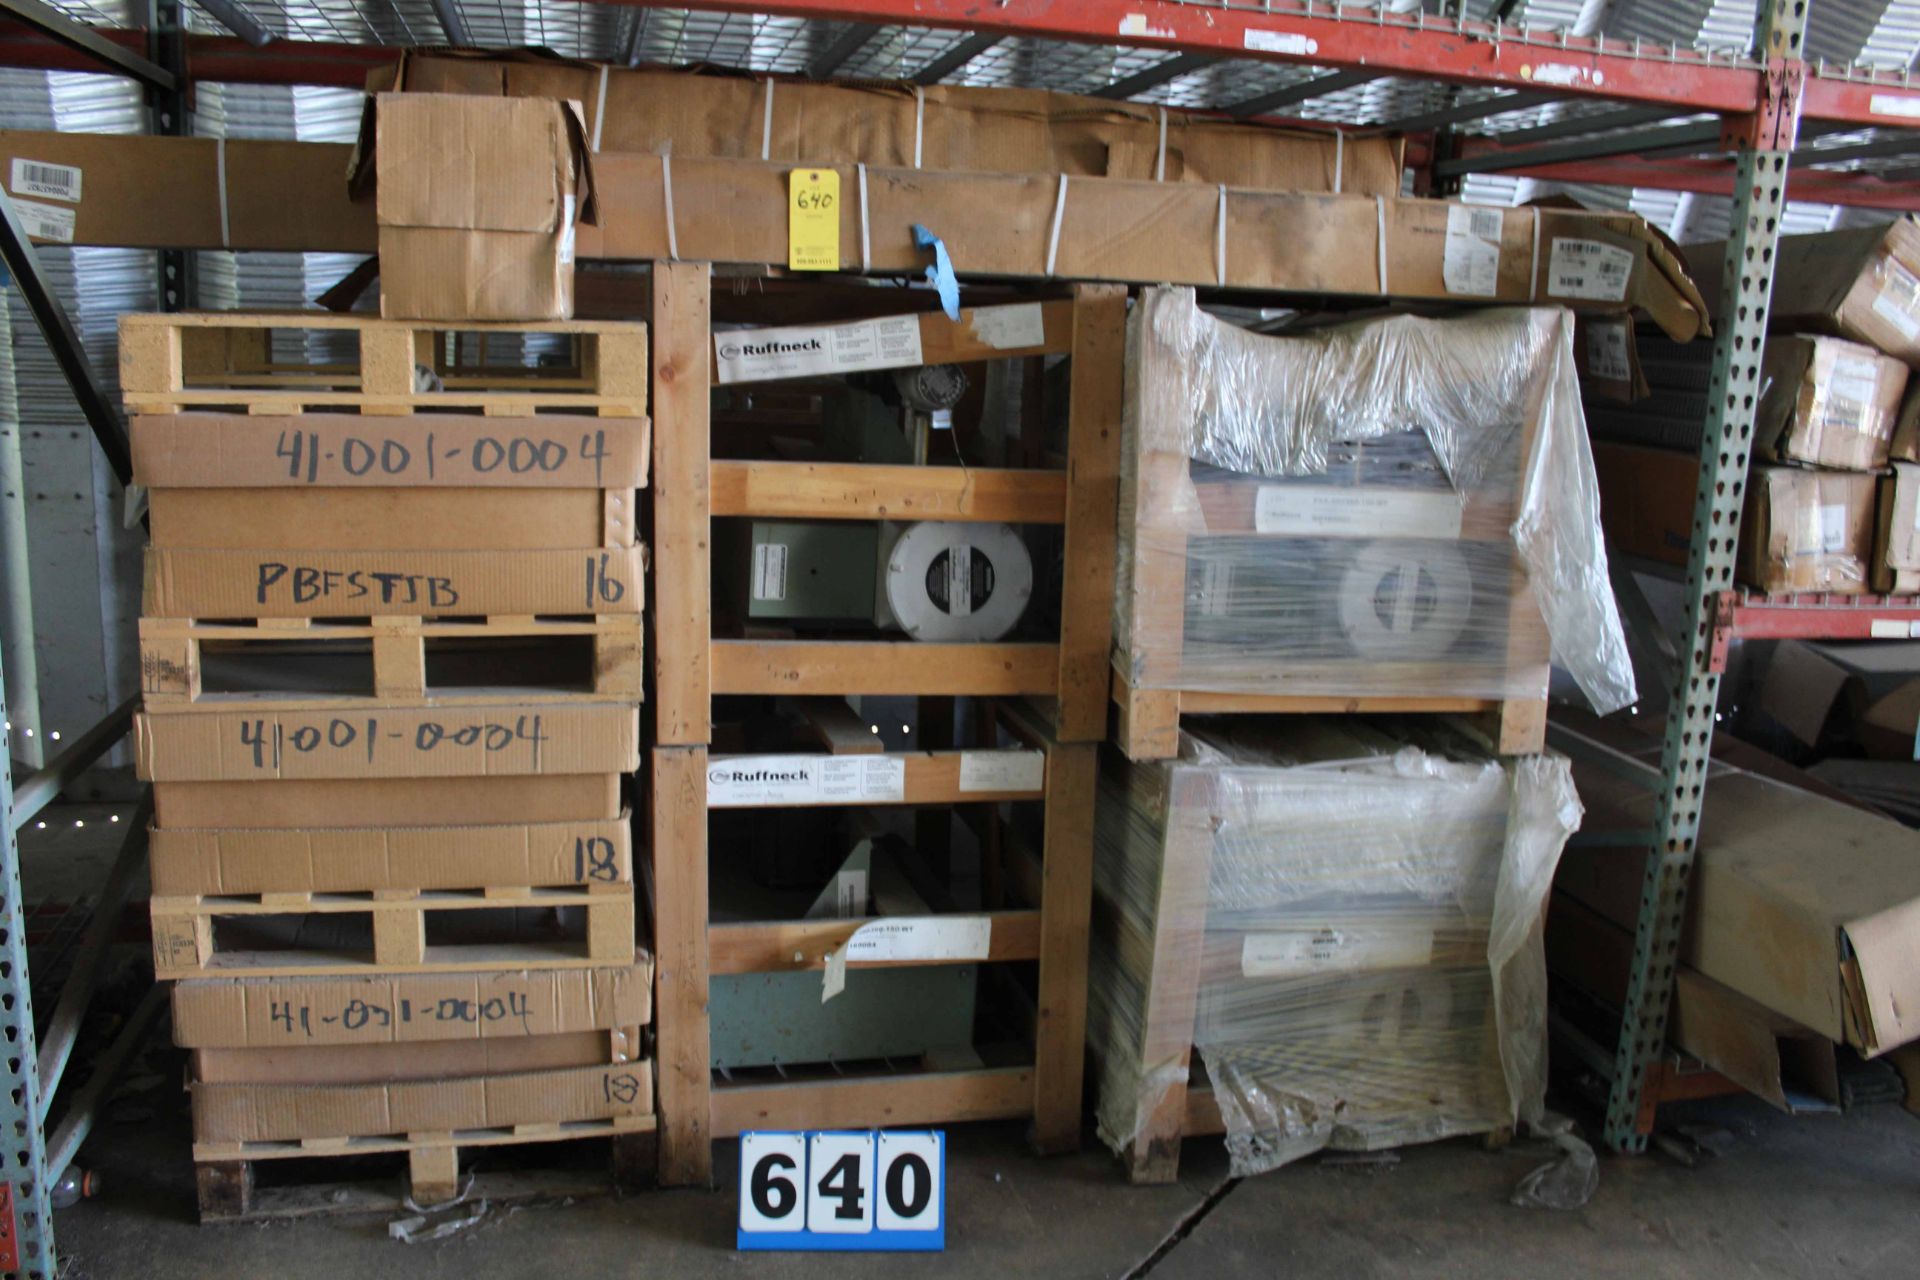 LOT CONTENTS OF ONE PALLET RACKING: heaters, Ruffneck Mdl. FX5